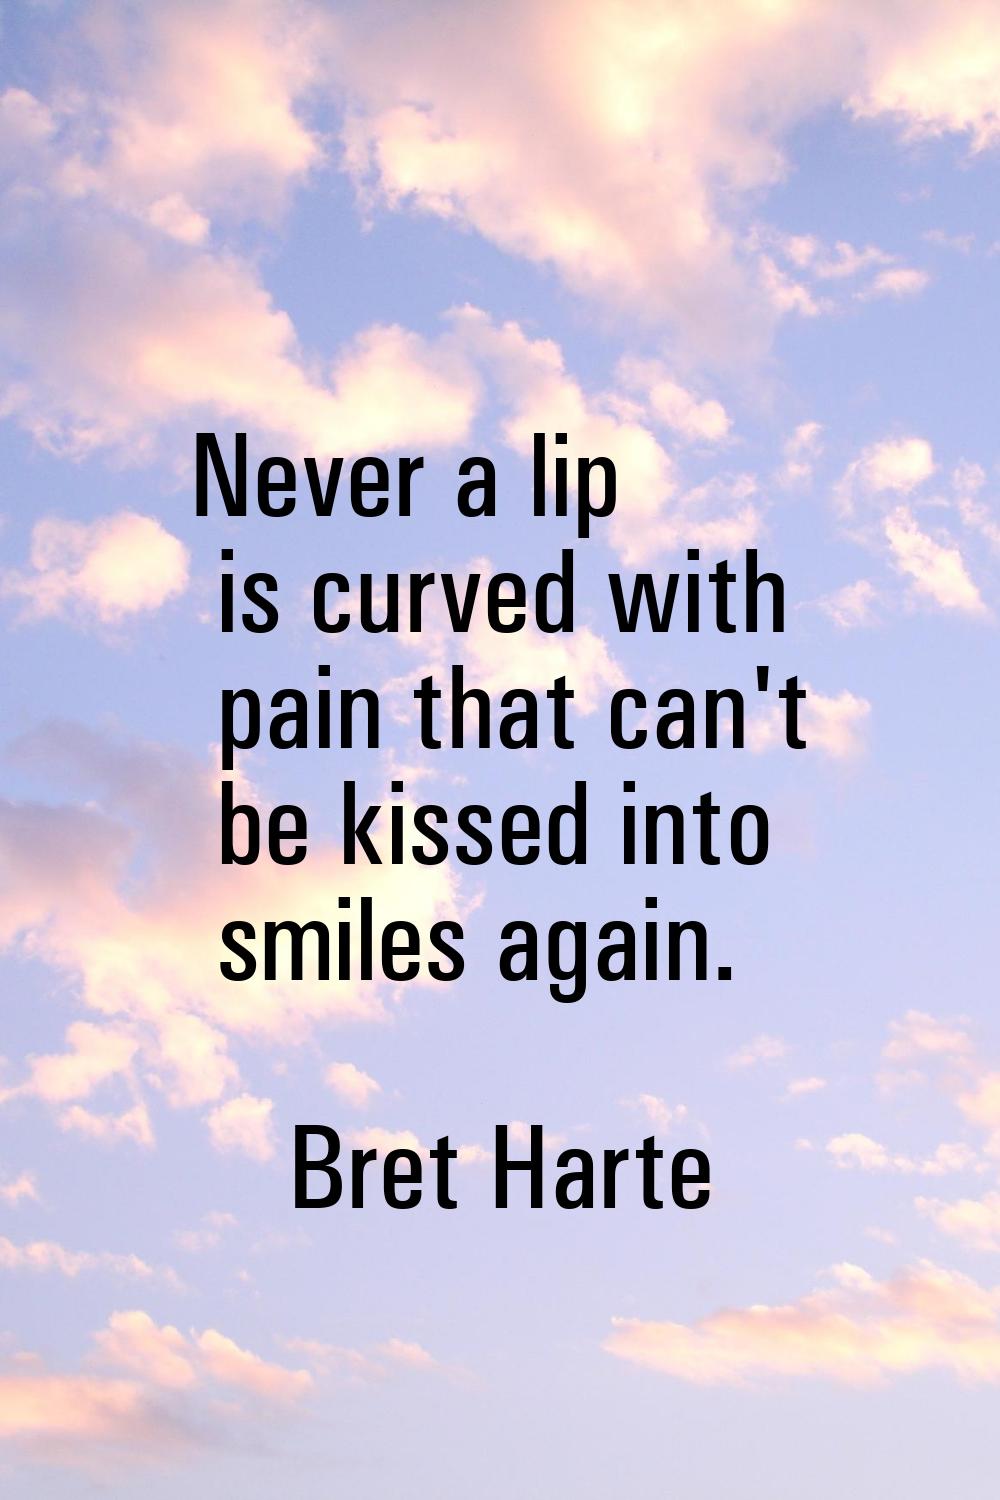 Never a lip is curved with pain that can't be kissed into smiles again.